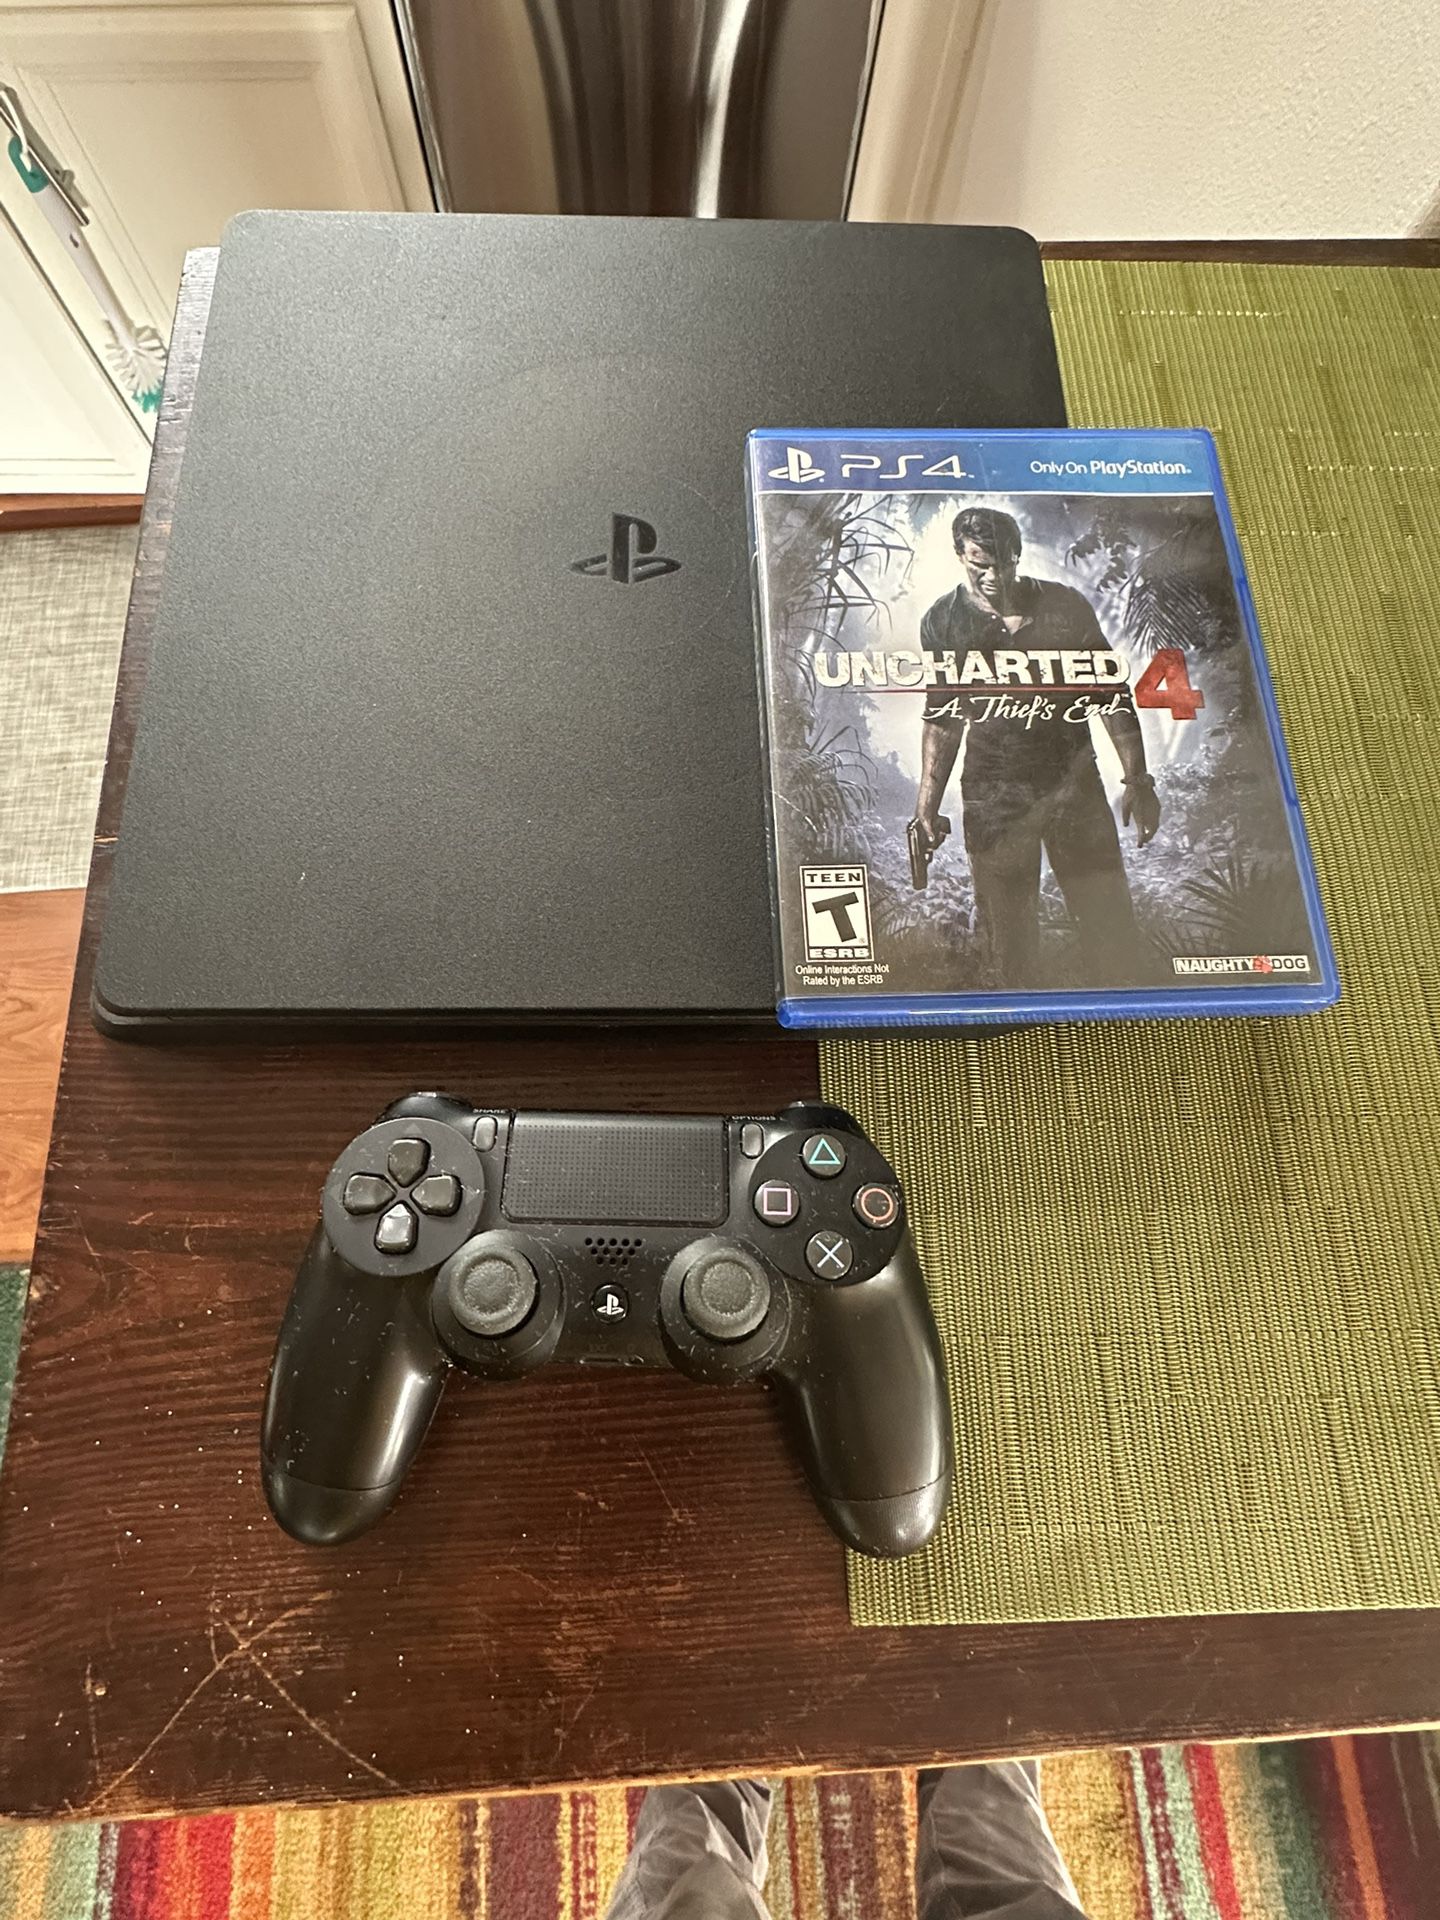 Ps4 Slim with Controller, Uncharted 4